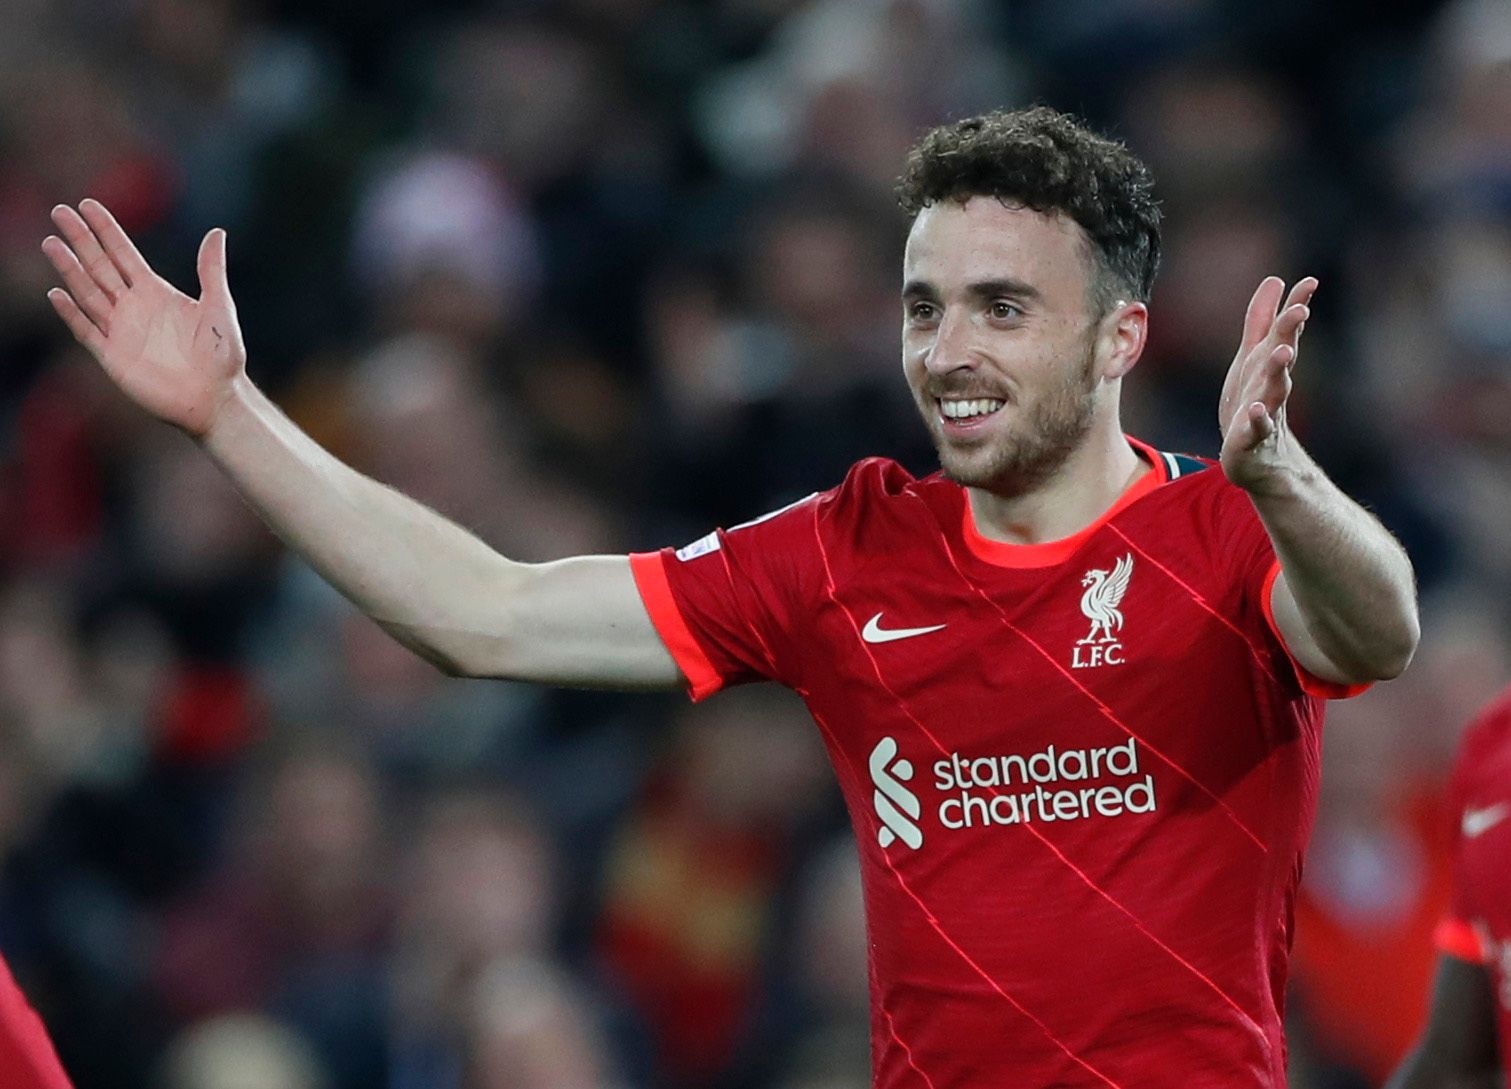 Soccer Football - Champions League - Group B - Liverpool v Atletico Madrid - Anfield, Liverpool, Britain - November 3, 2021 Liverpool's Diogo Jota celebrates scoring their first goal Action Images via Reuters/Lee Smith